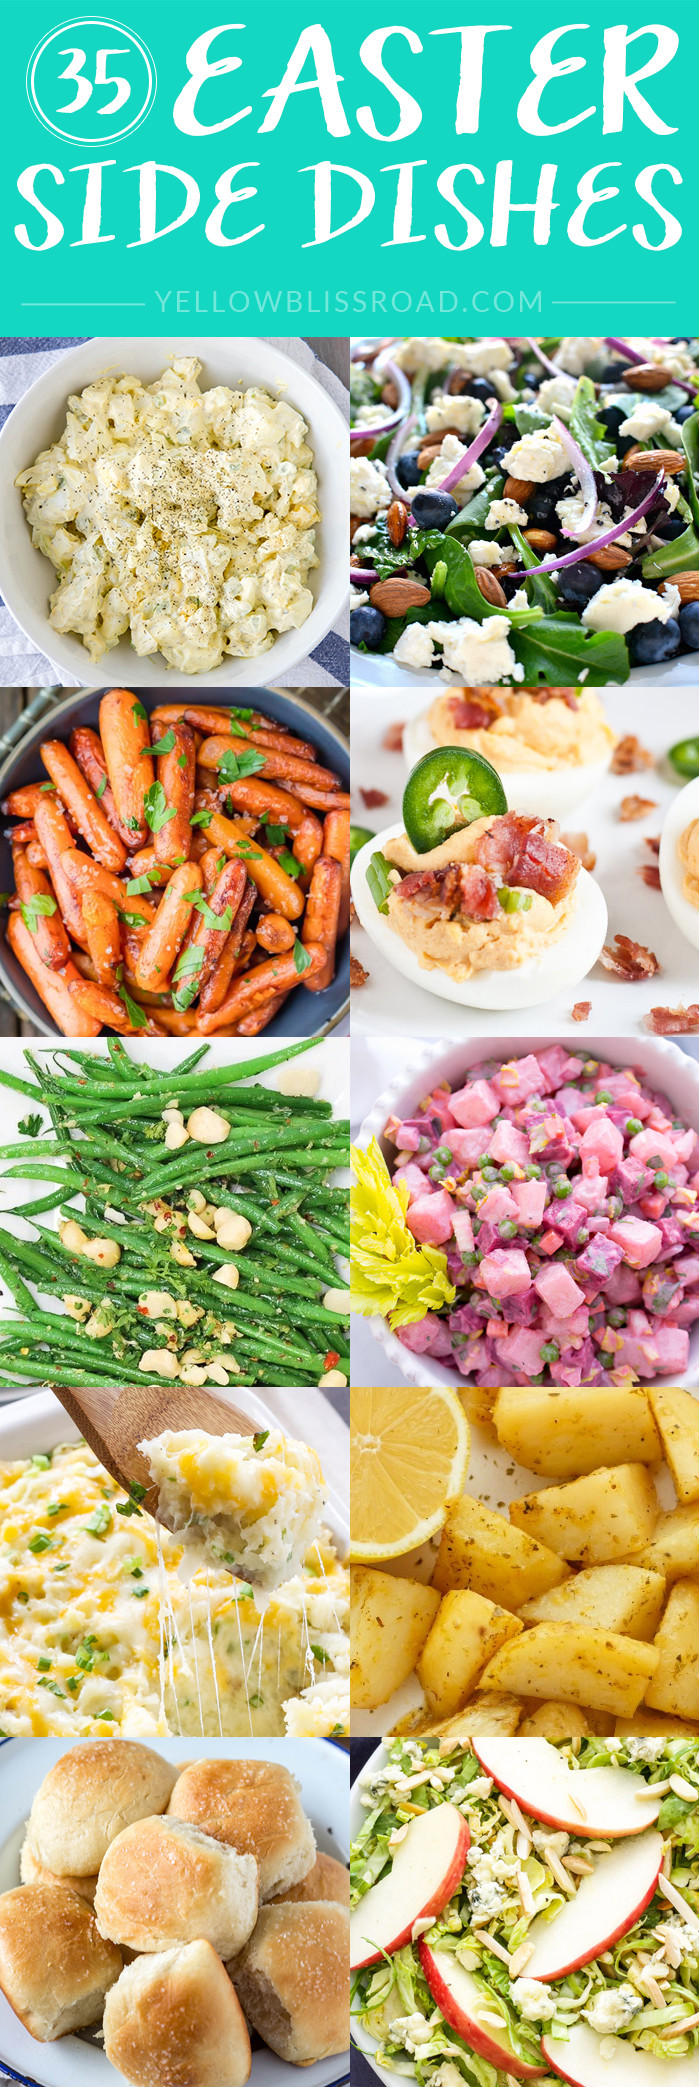 Food For Easter Dinner
 Easter Side Dishes More than 50 of the Best Sides for